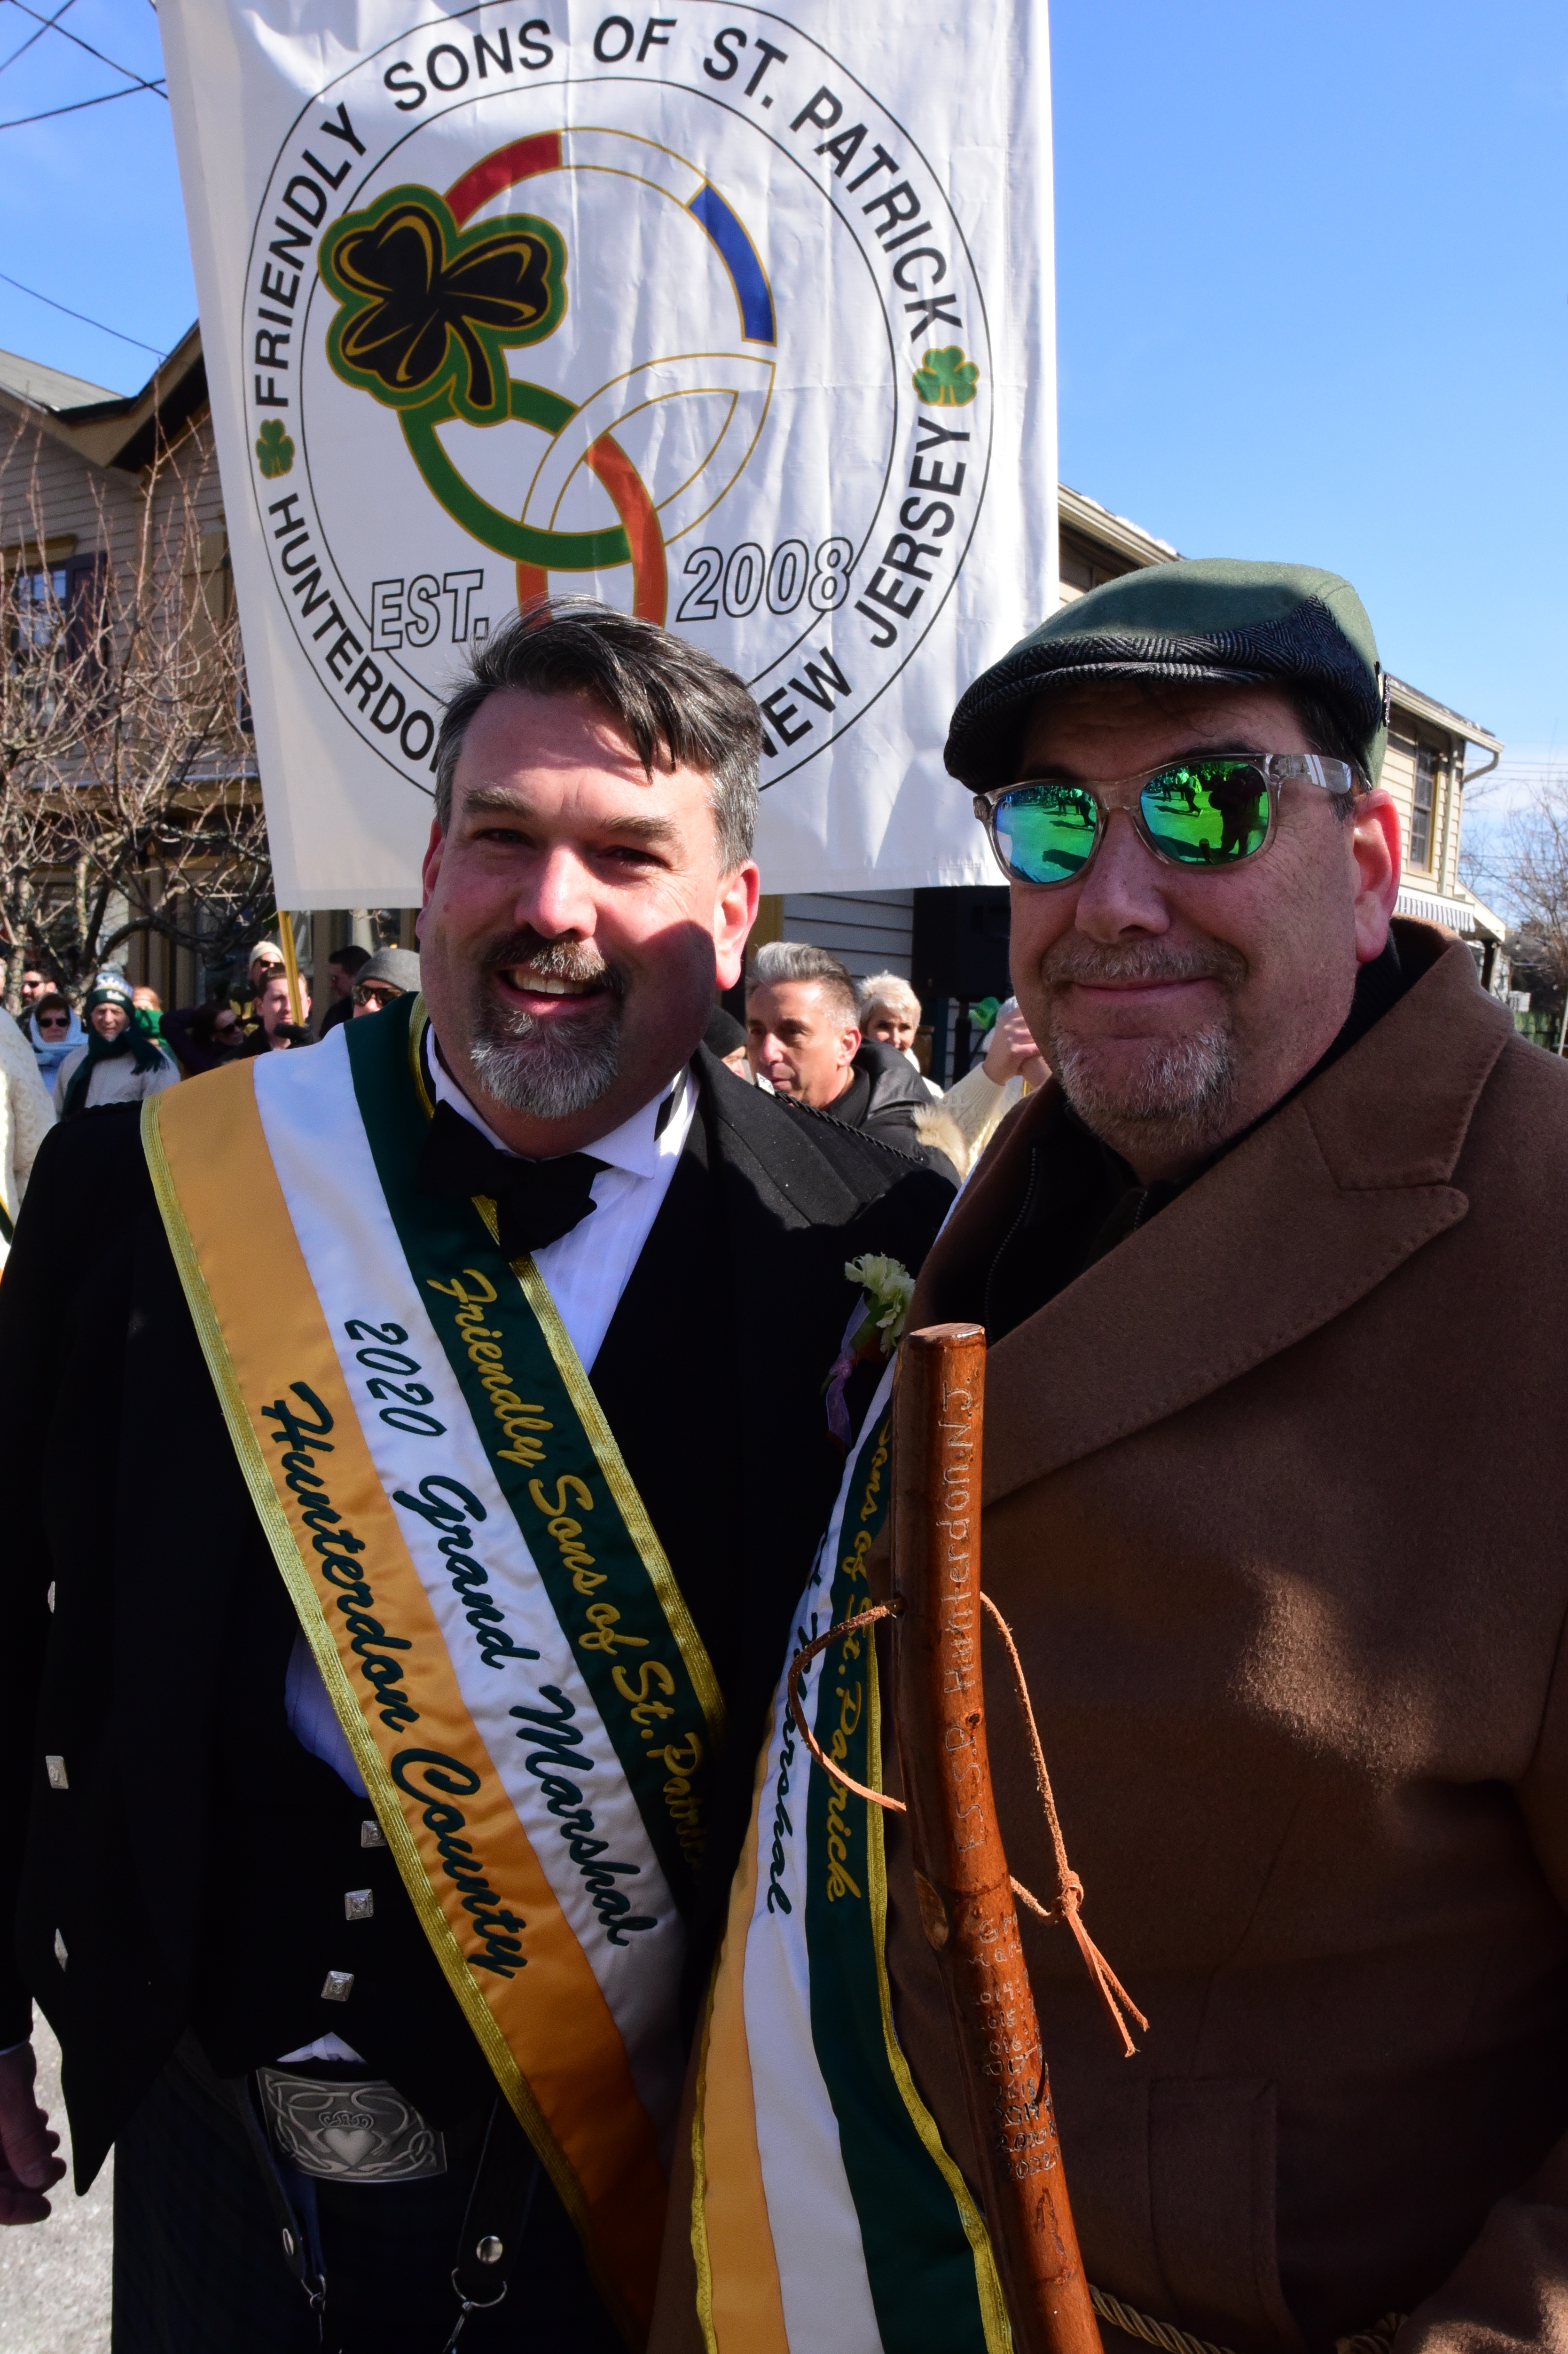 The 2022 St. Patrick's Day Parade hosted by the Friendly Sons of St. Patrick Hunterdon County took place in Clinton on March 13. Here, 2020 Parade Grand Marshal Richard Hall (left) with 2022 Parade Grand Marshal David Bolduc.